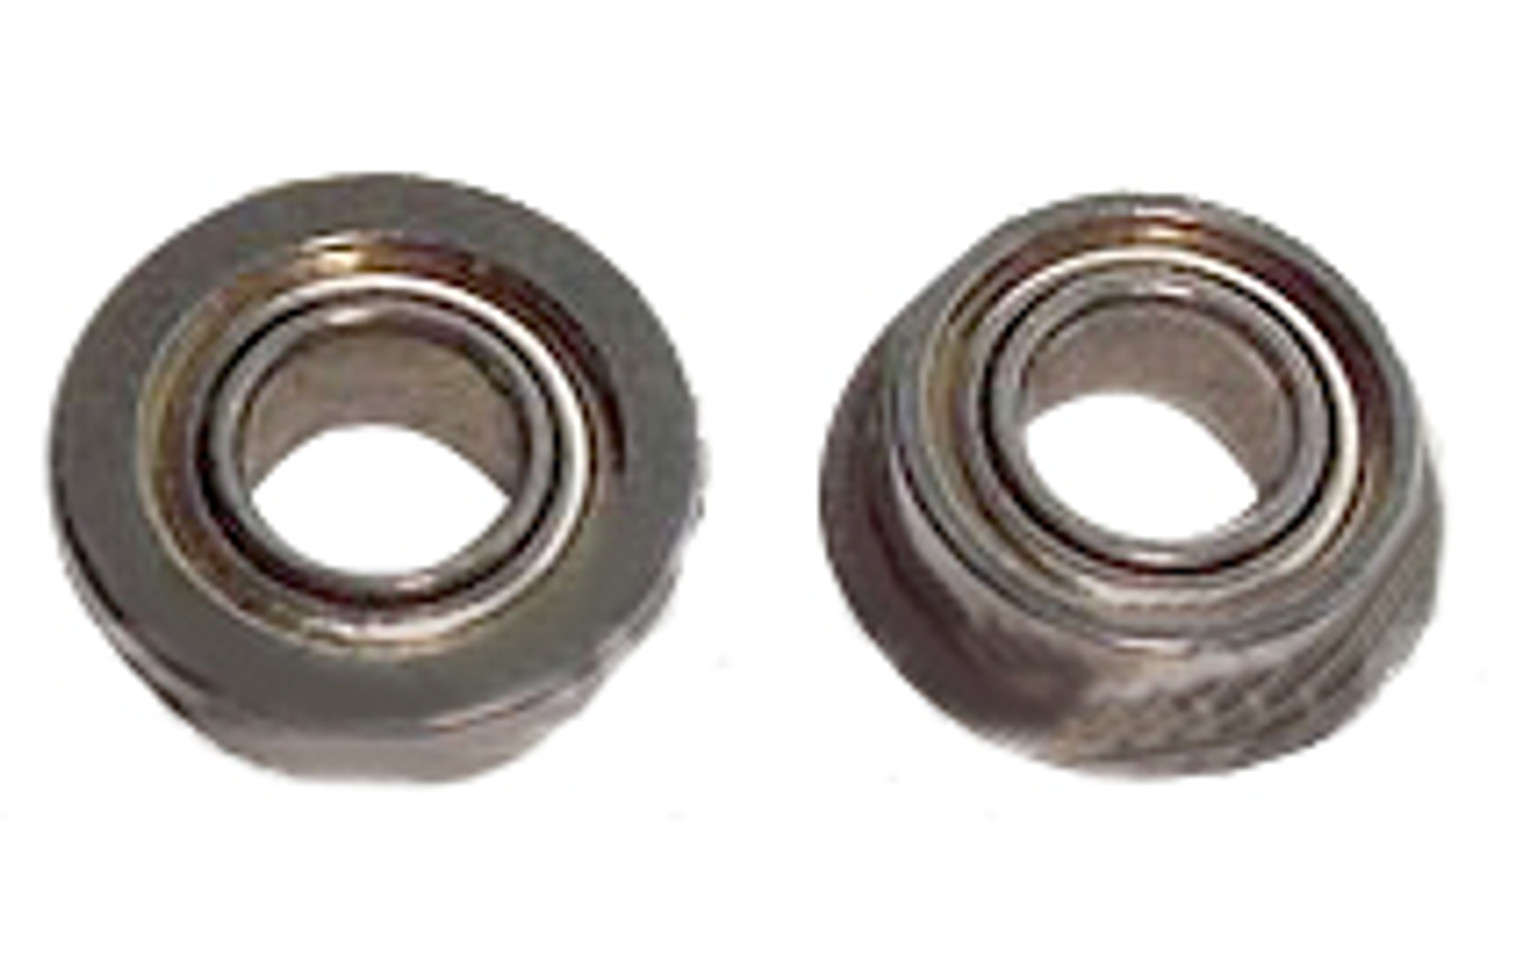 Celcius Technology Bevel Gear Bearing Set for CTW / Systema PTW Series AEG Rifle - (Set of 2)